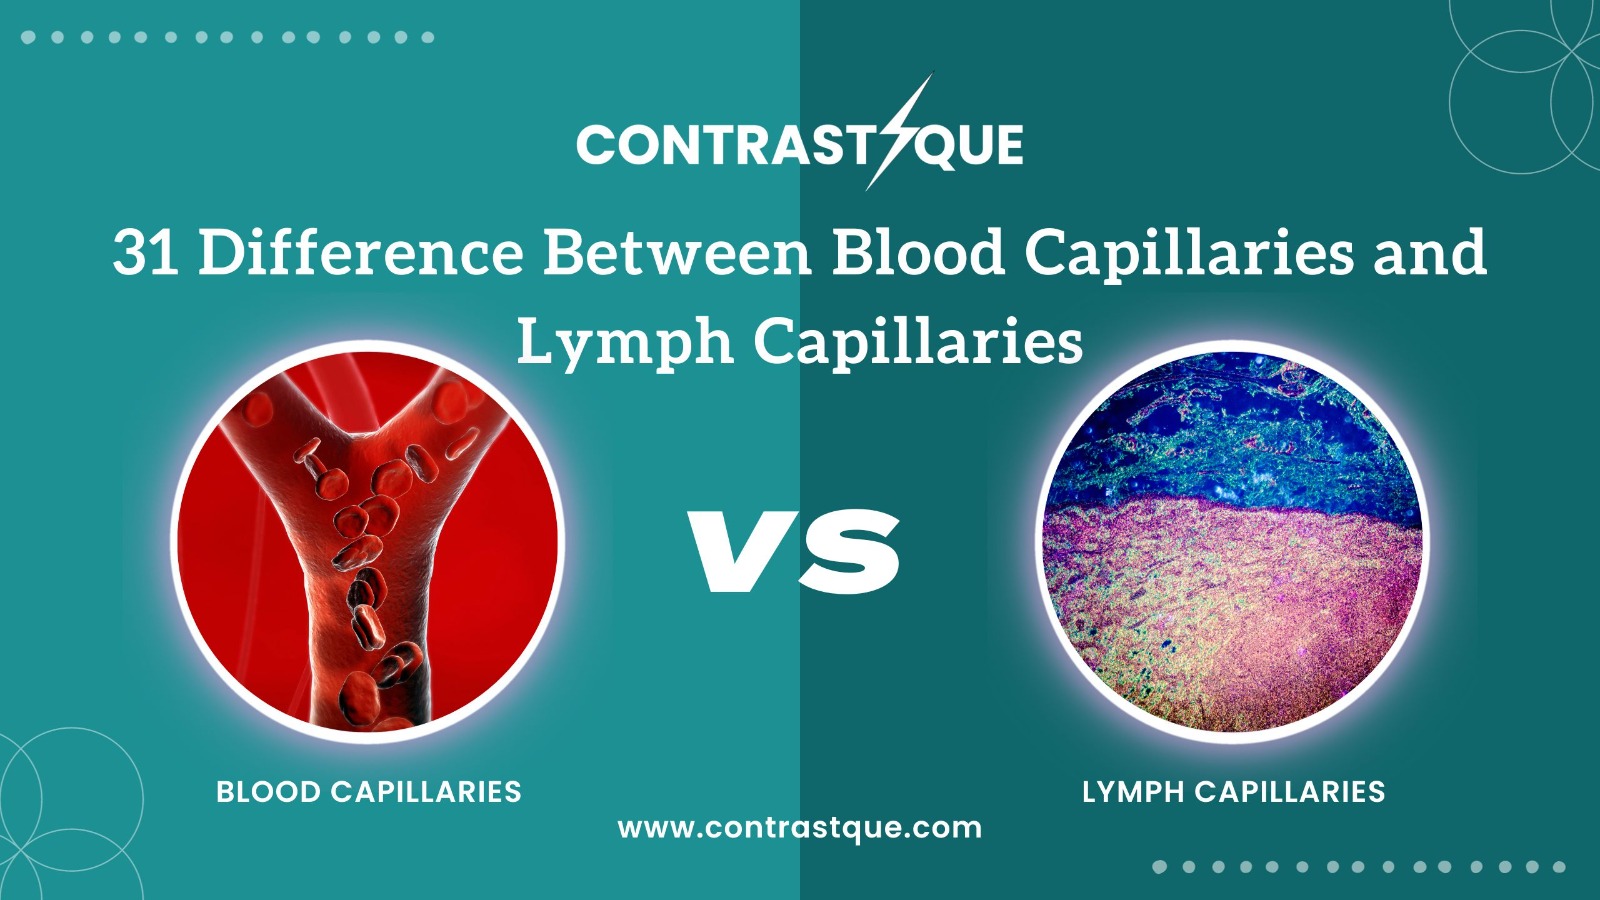 31 Difference Between Blood Capillaries and Lymph Capillaries